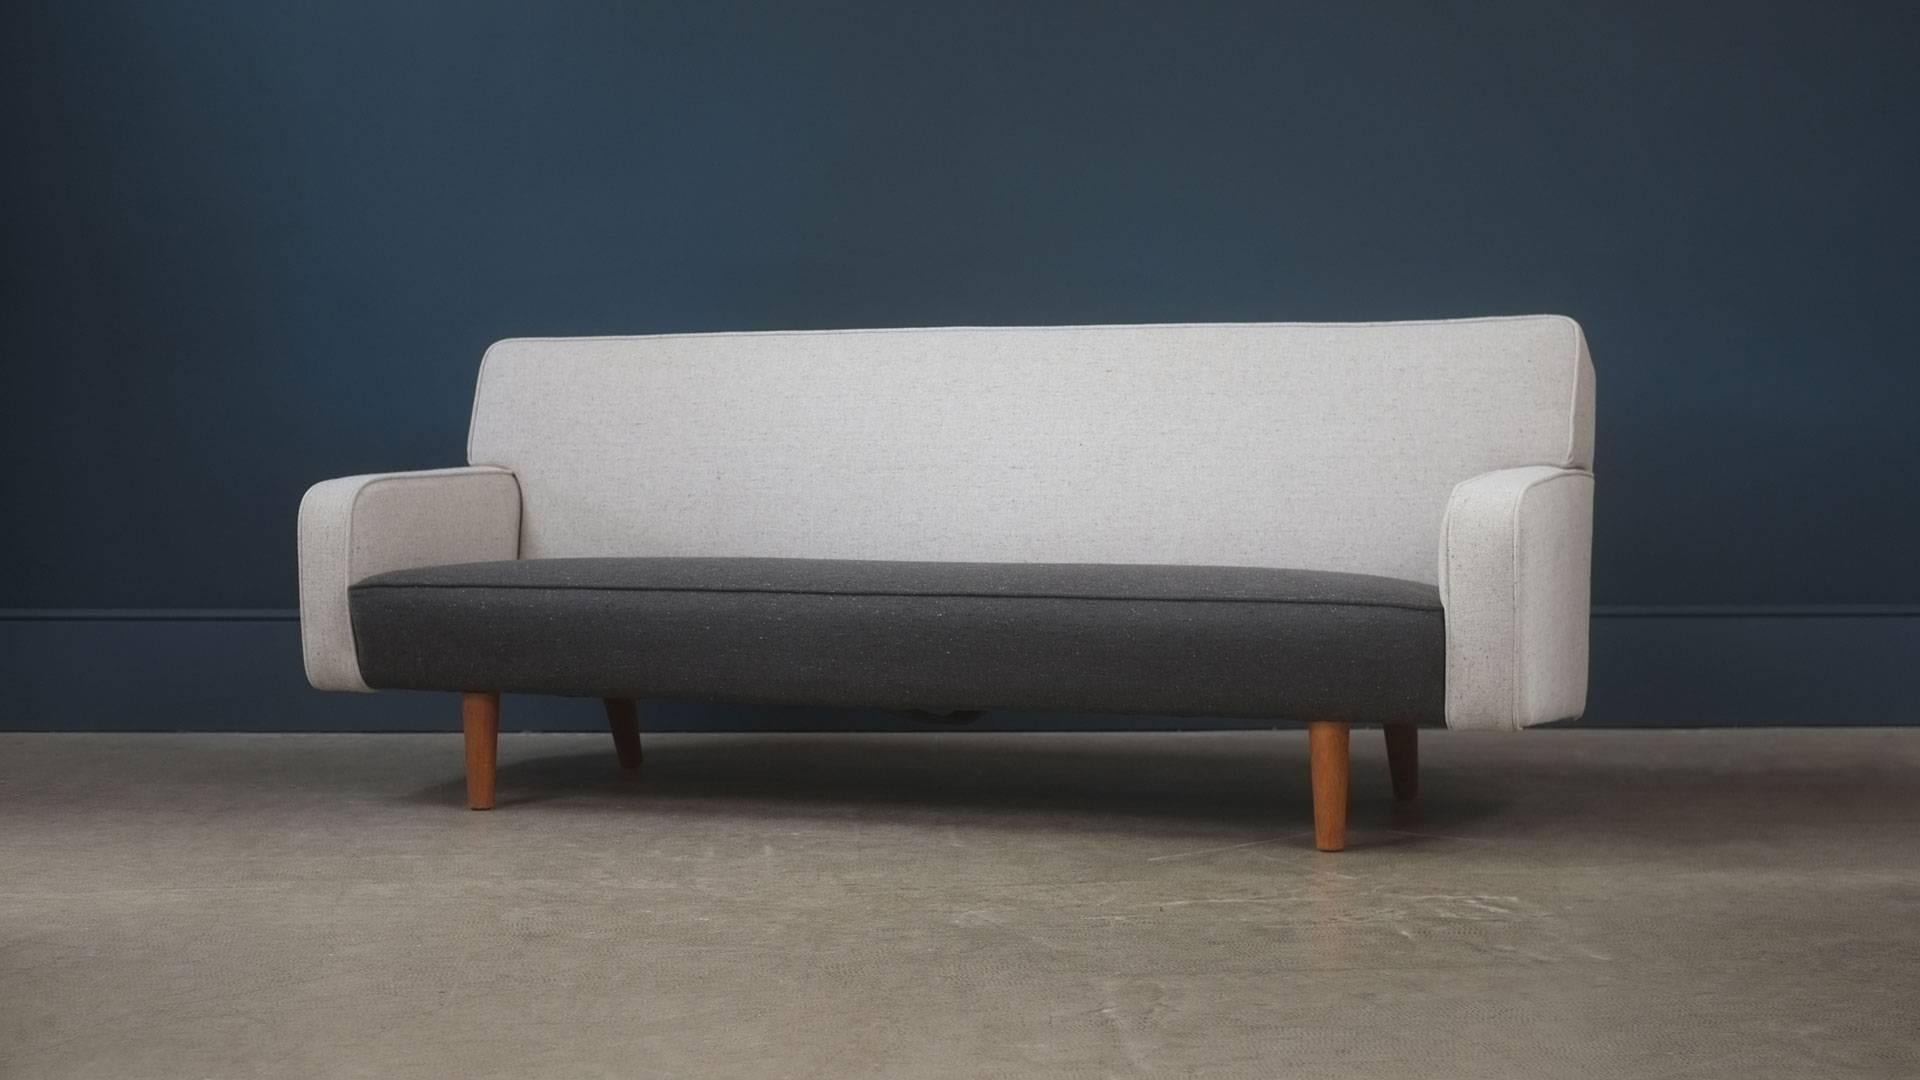 Ultra elegant sofa designed by Hans Wegner for cabinet maker AP Stolen, Denmark. Very comfortable sofa fully reconditioned and reupholstered in fabulous contrasting fleck fabric. Great piece.
 